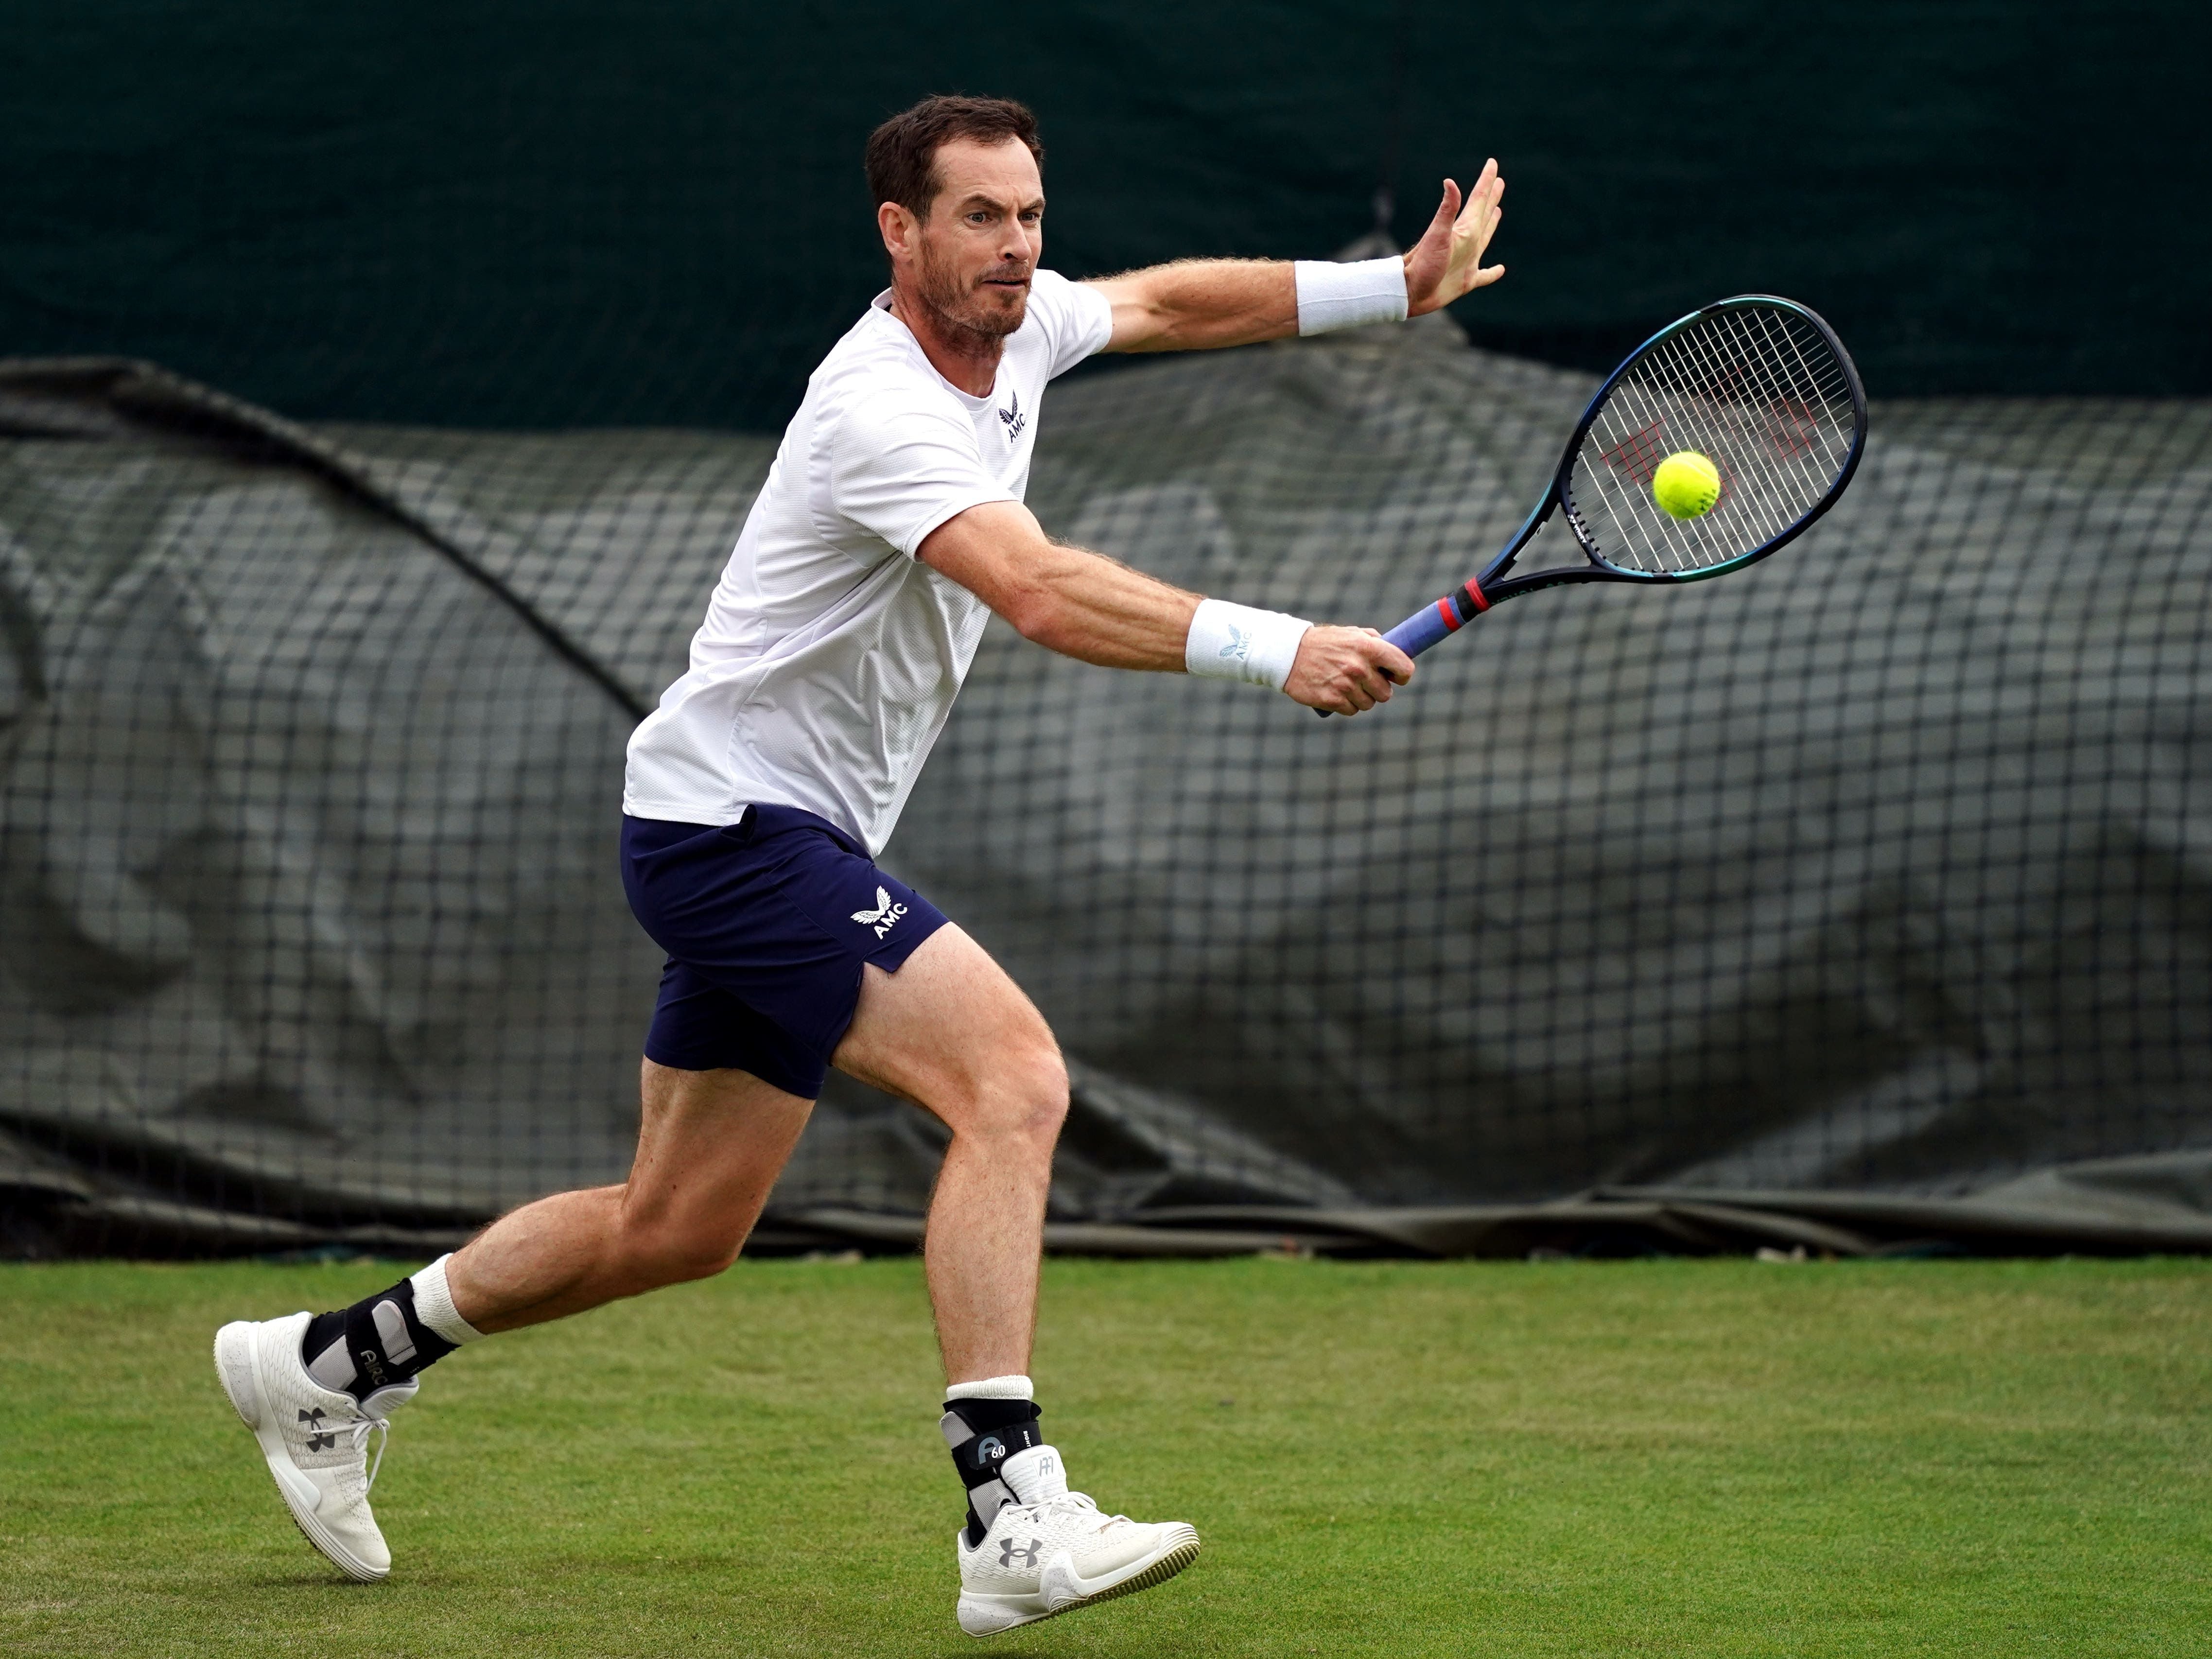 Andy Murray shows signs of improvement as he prepares to make Wimbledon decision